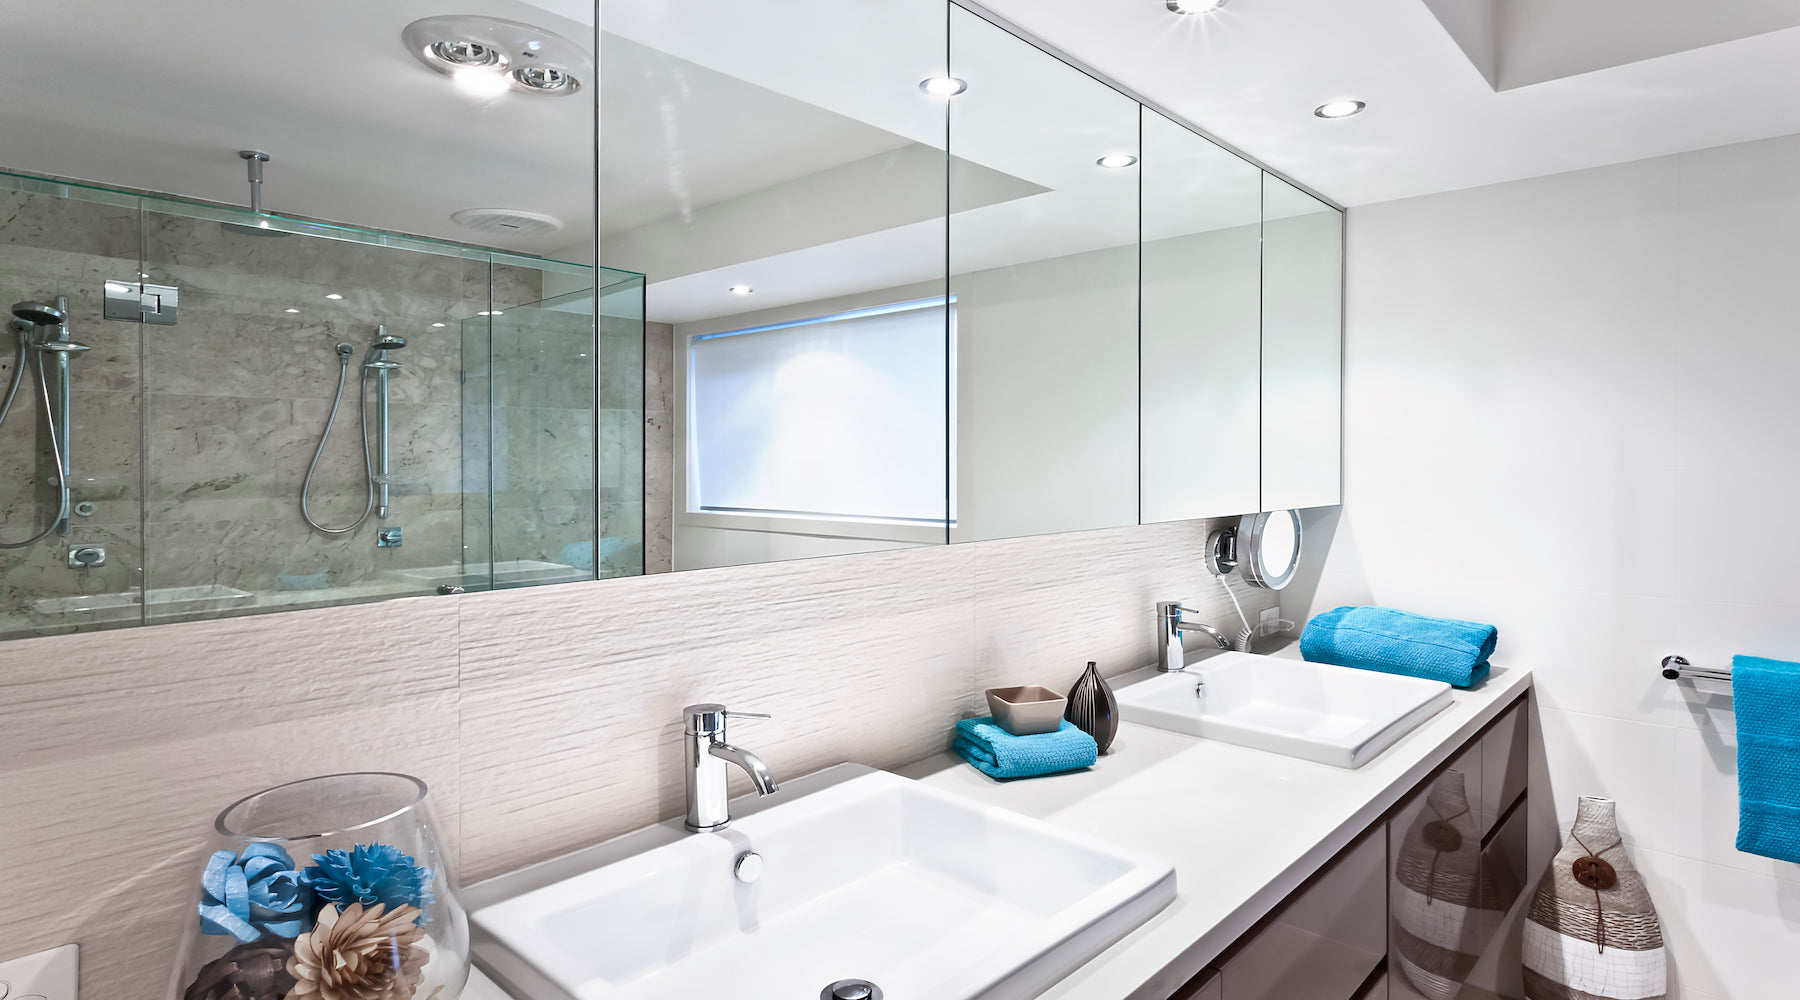 PAR20 LED bulbs installed in recessed ceiling lights located in modern bathroom